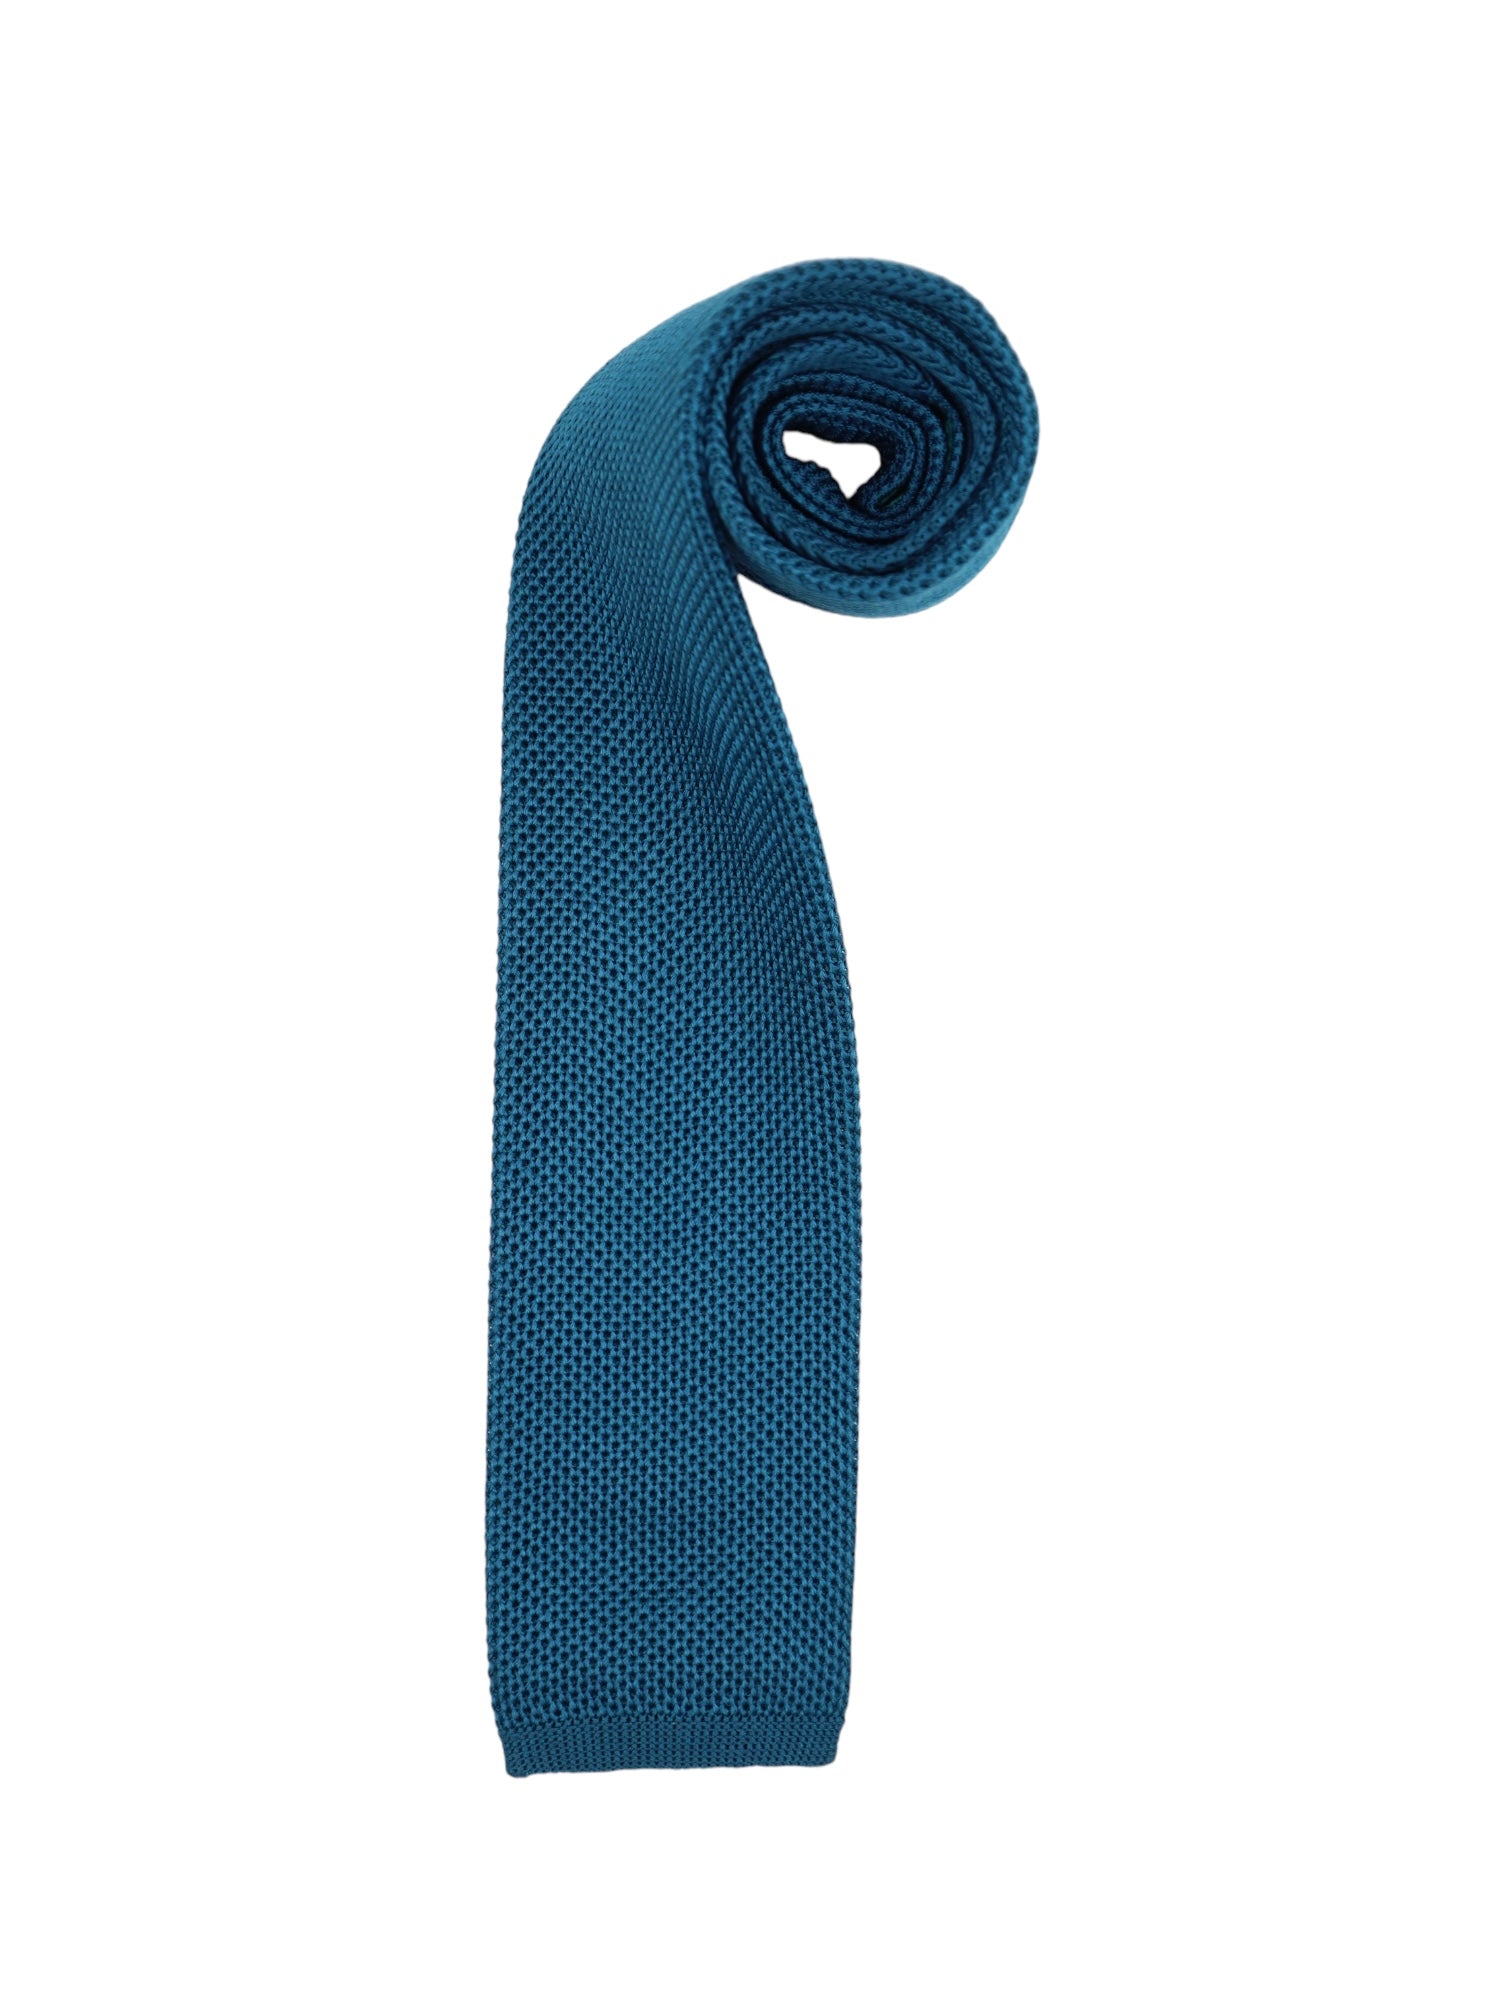 Kiton Turquoise Knitted Silk Tie